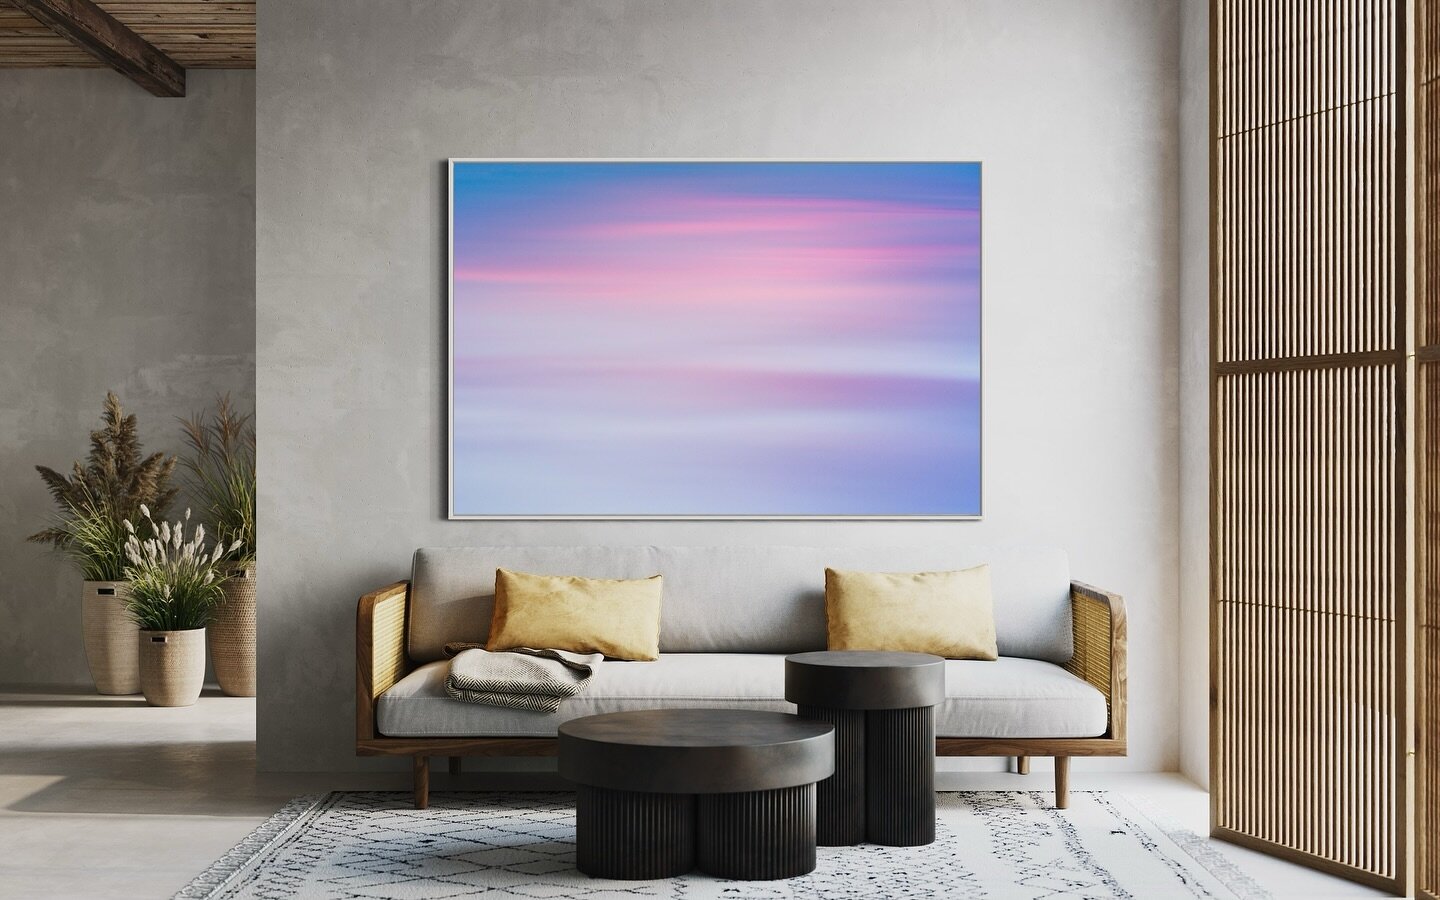 Limited edition prints available at ymagery.com
~

~

~
#abstractart #photography #interior #design #modernart #peace #interiordesign #abstractphotography #art #gallery #museumart #artforsale #collection #artcollector #wallart #skyart #southbeach #ar